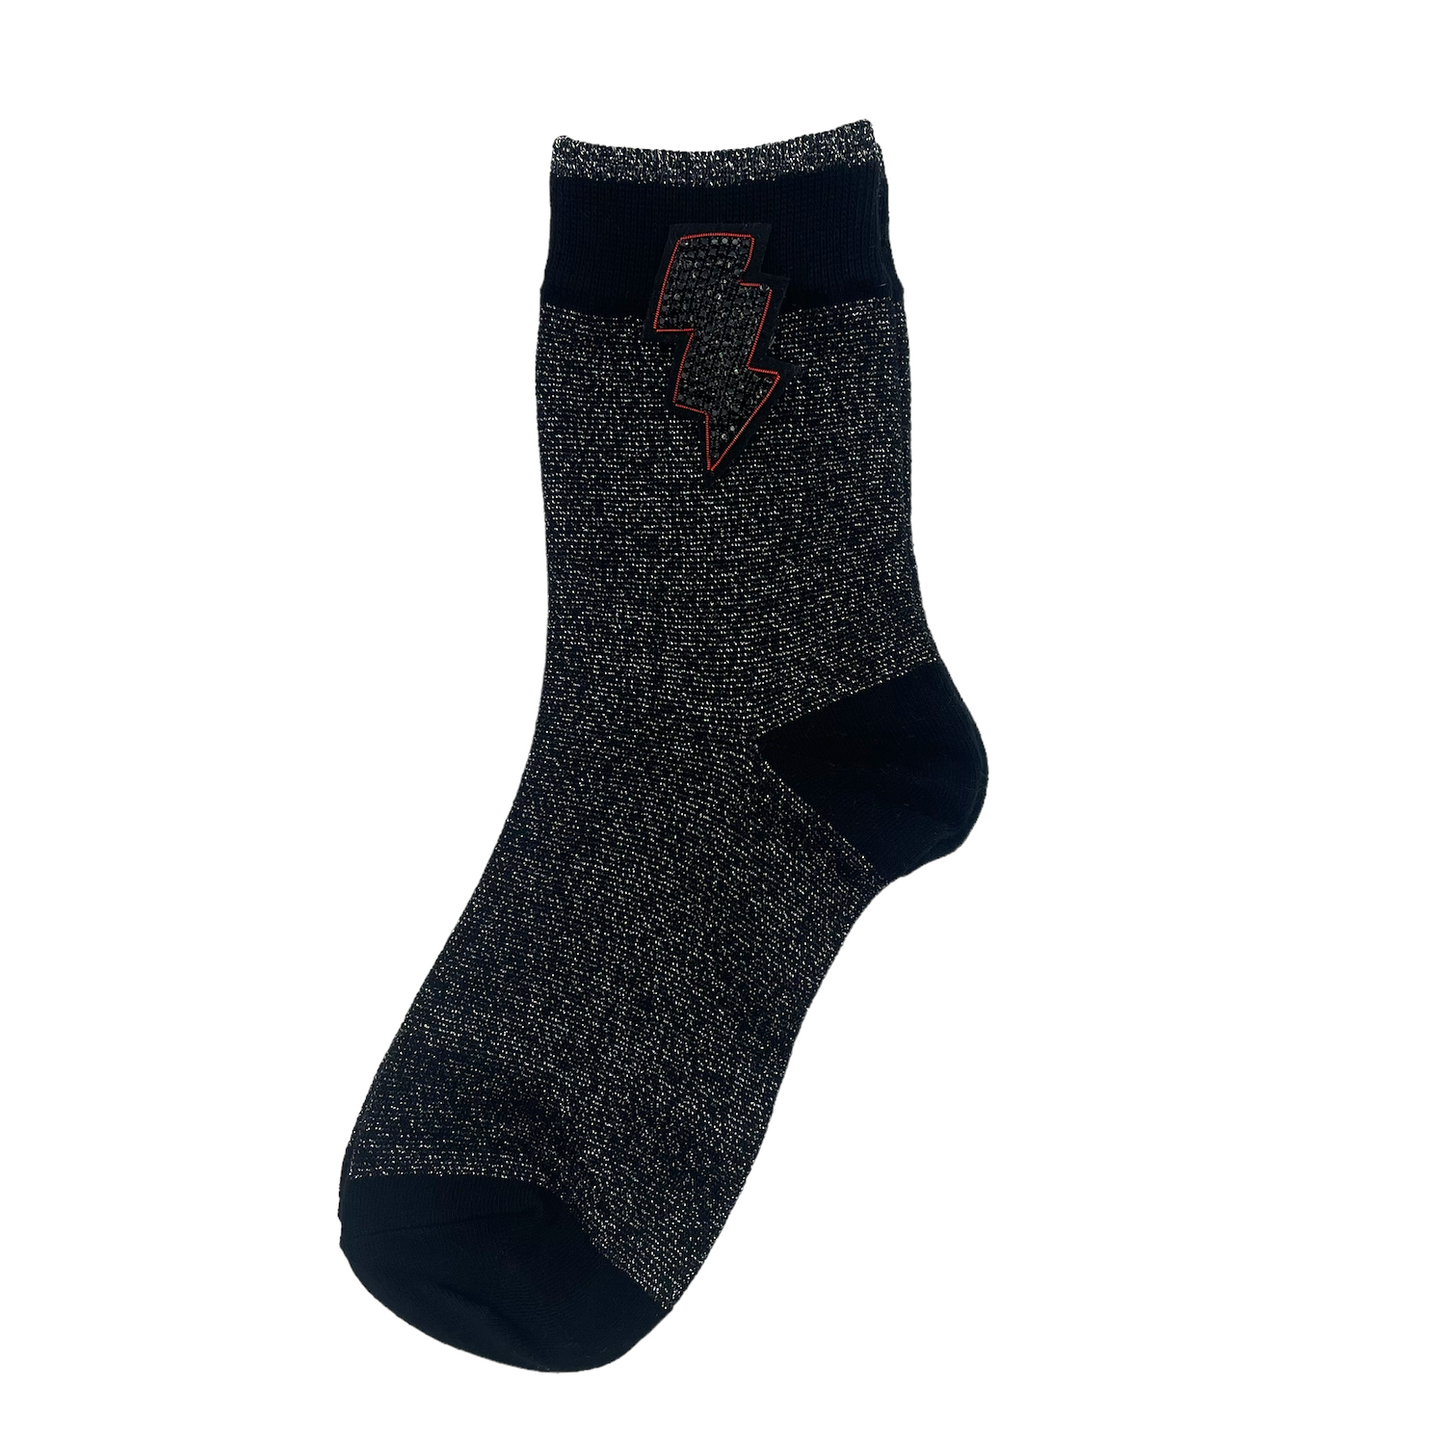 Tokyo socks in black with a large beaded lightning bolt pin